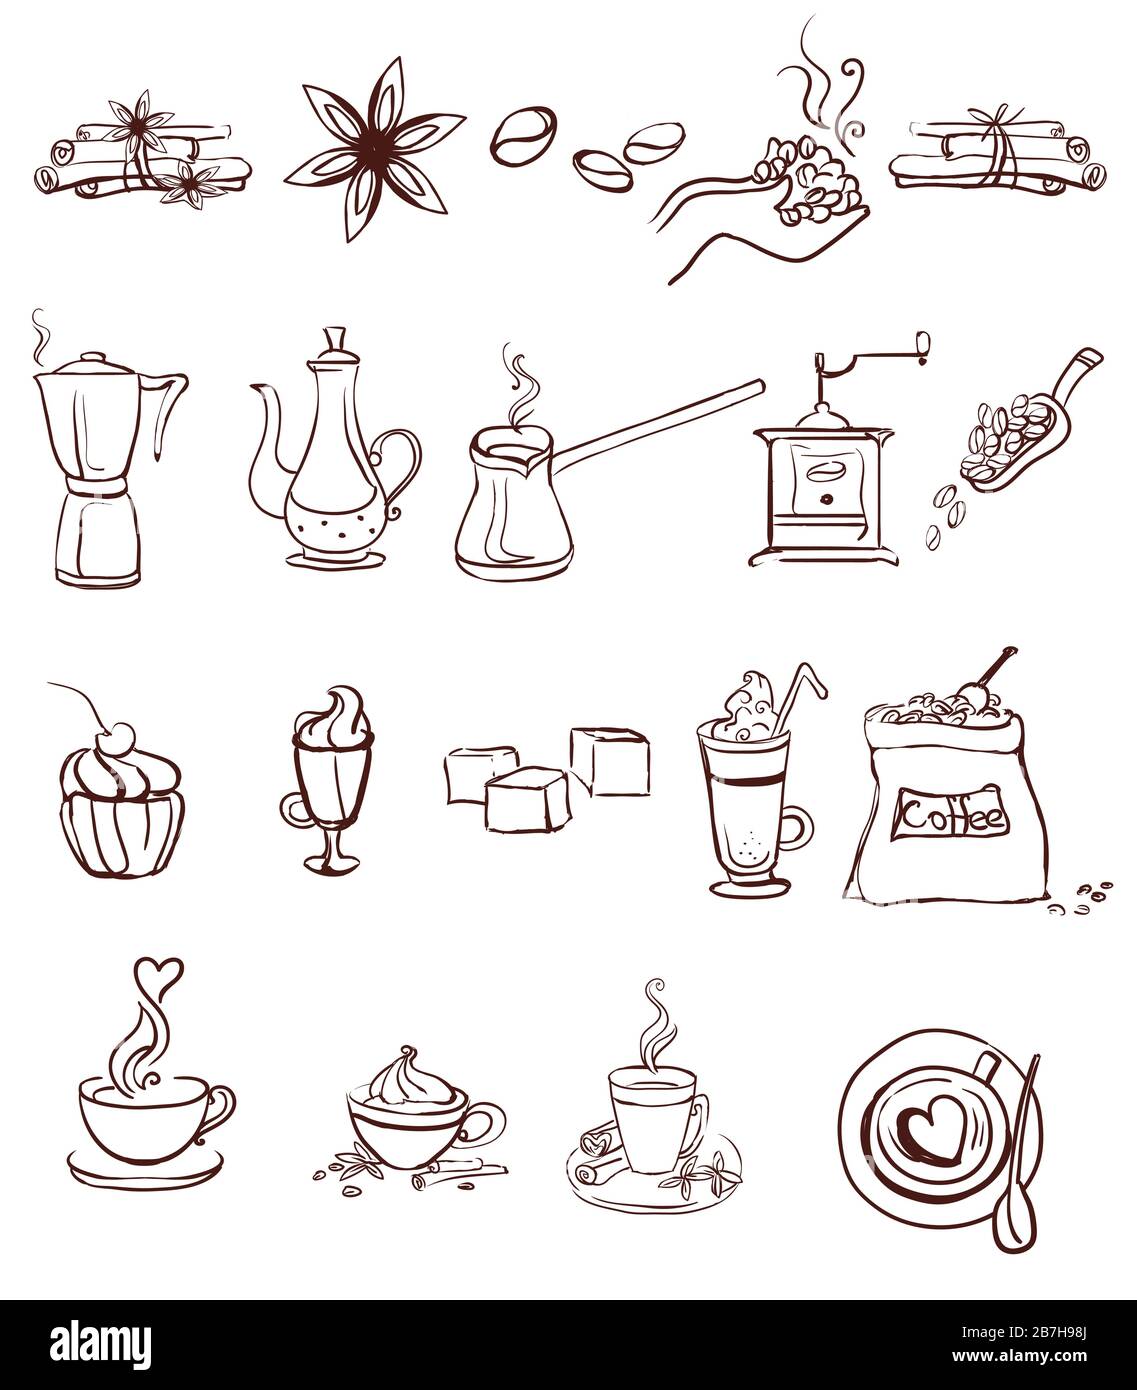 Set of vector coffee icons isolated on white background. Hand drawing doodle style coffee illustration elements for your buisness.  Food and drink con Stock Vector